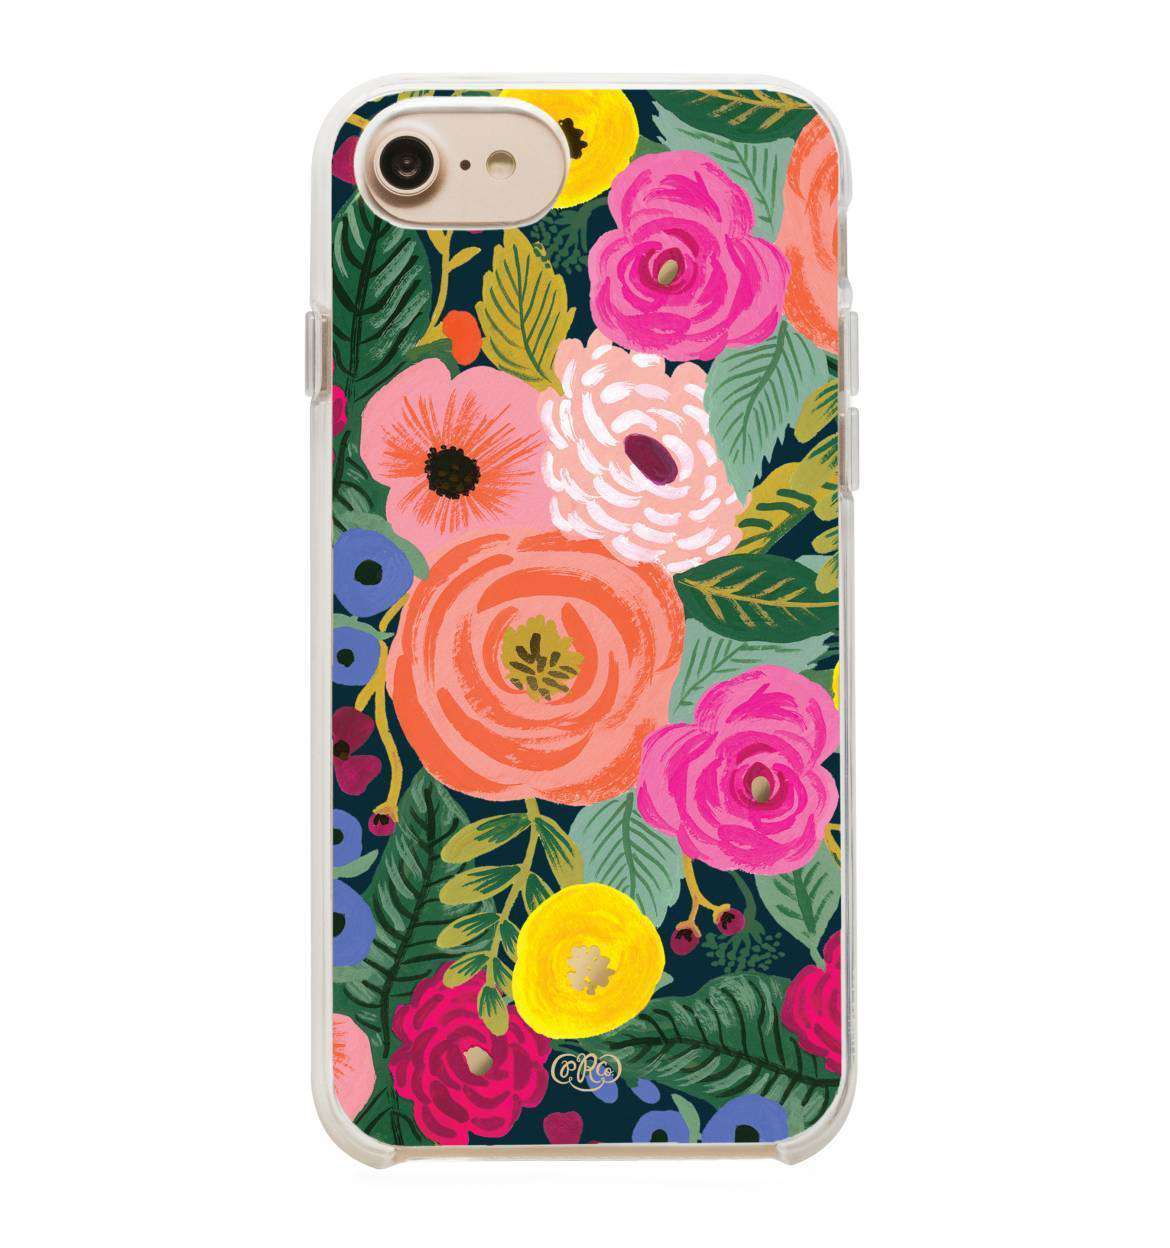 Women's pink and green floral iPhone clear cover